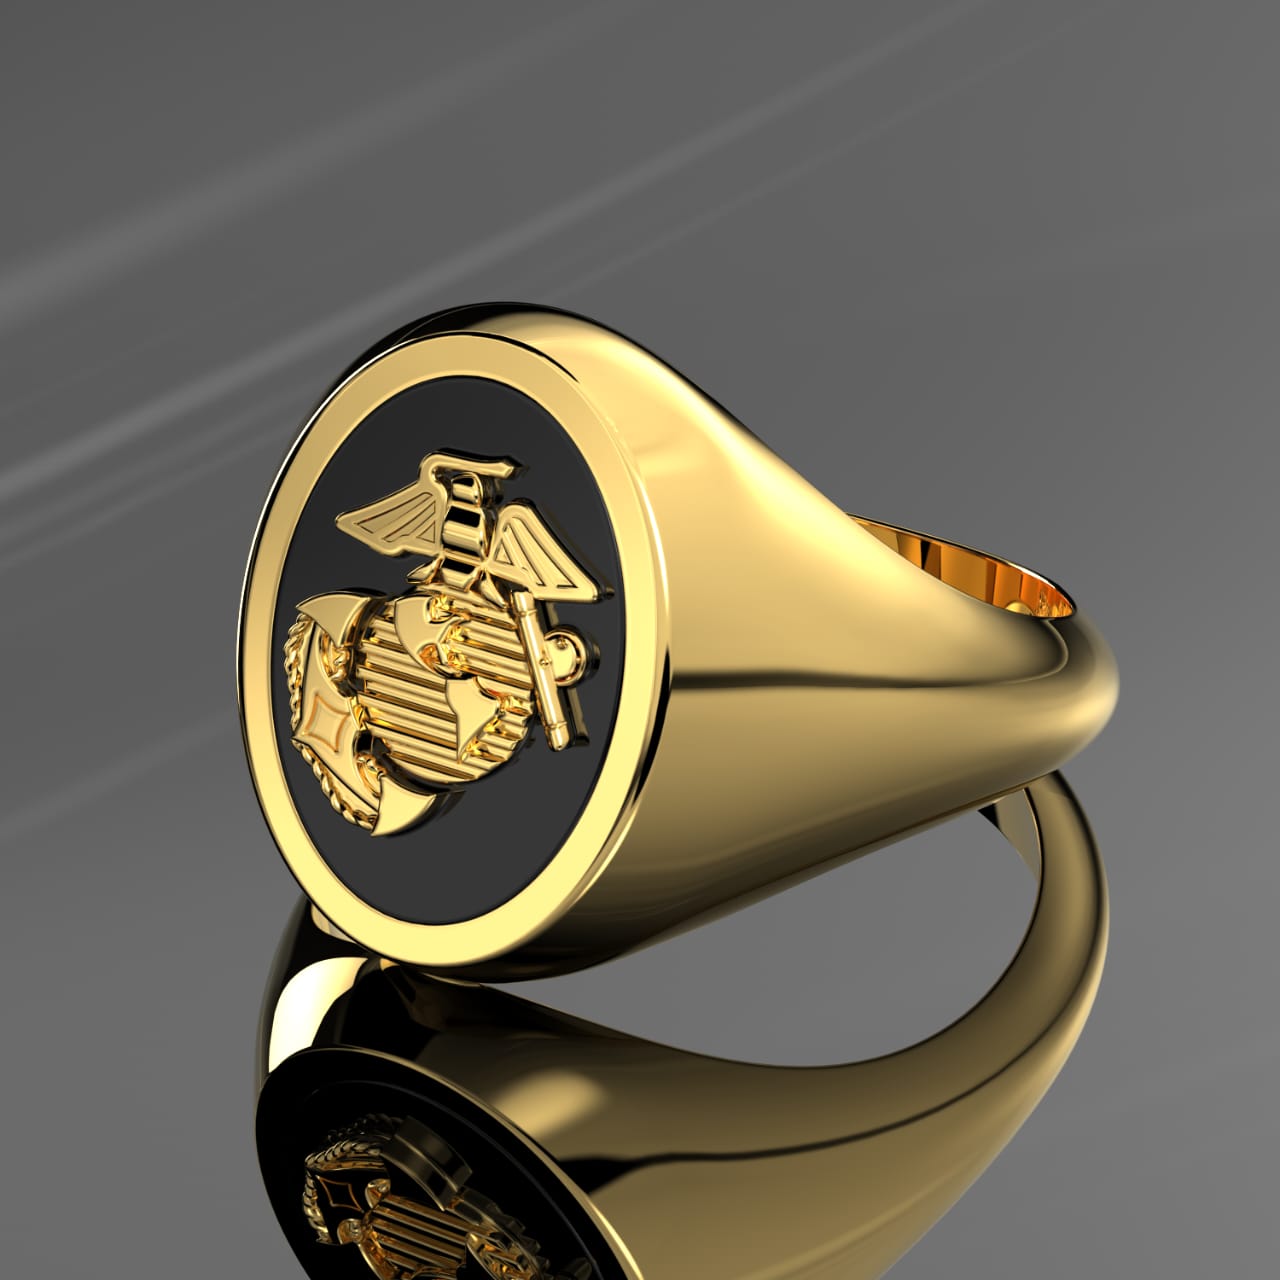 Customizable Oval 10k or 14k Gold US Military Solid Back Ring, Army, Marine Corps, Navy